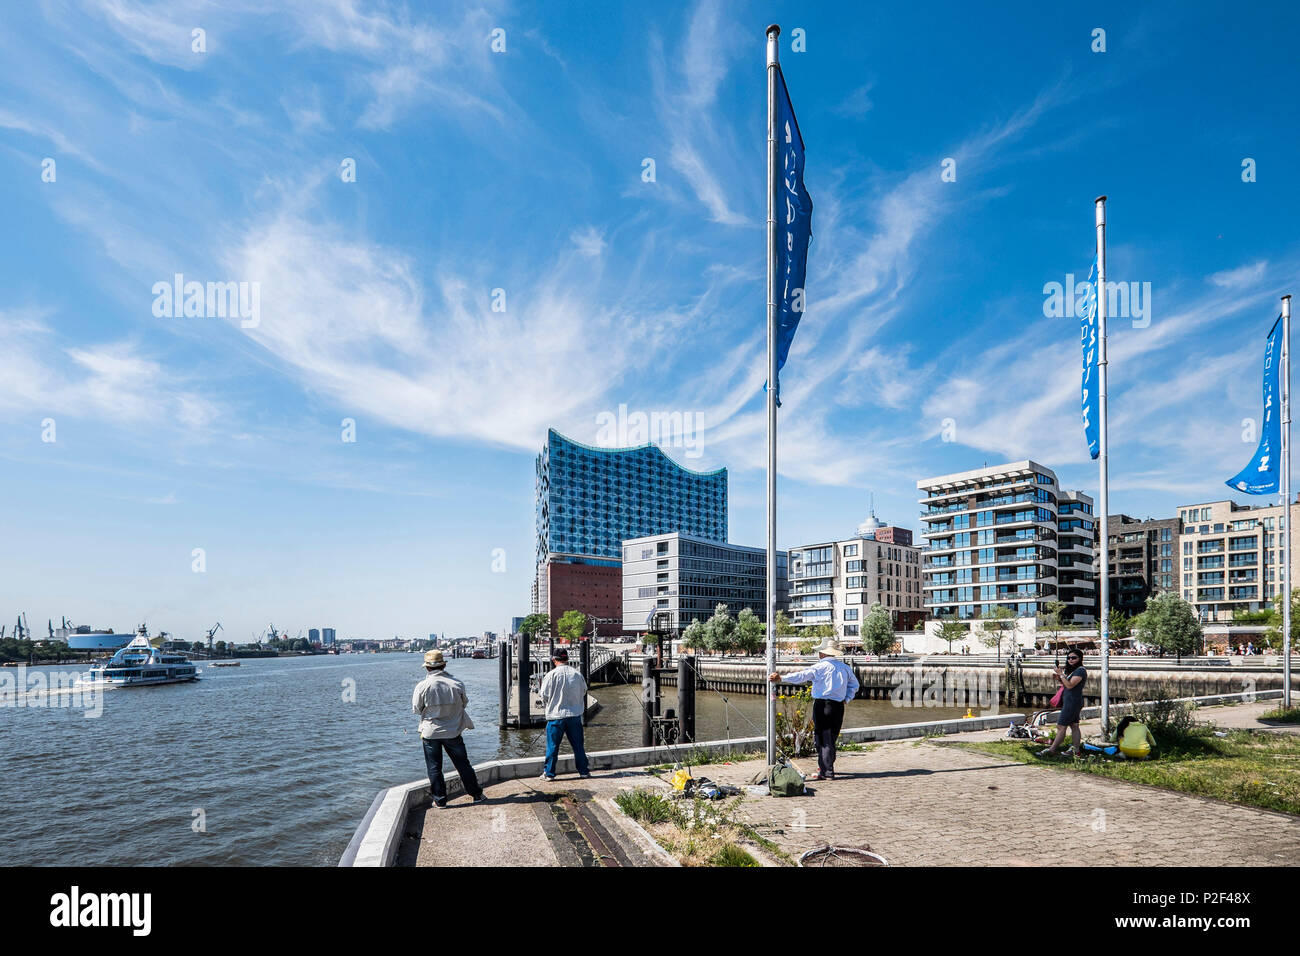 people fishing at Grasbrock harbour with view to the new Elbphilharmonie, Hafencity of Hamburg, north Germany, Germany Stock Photo